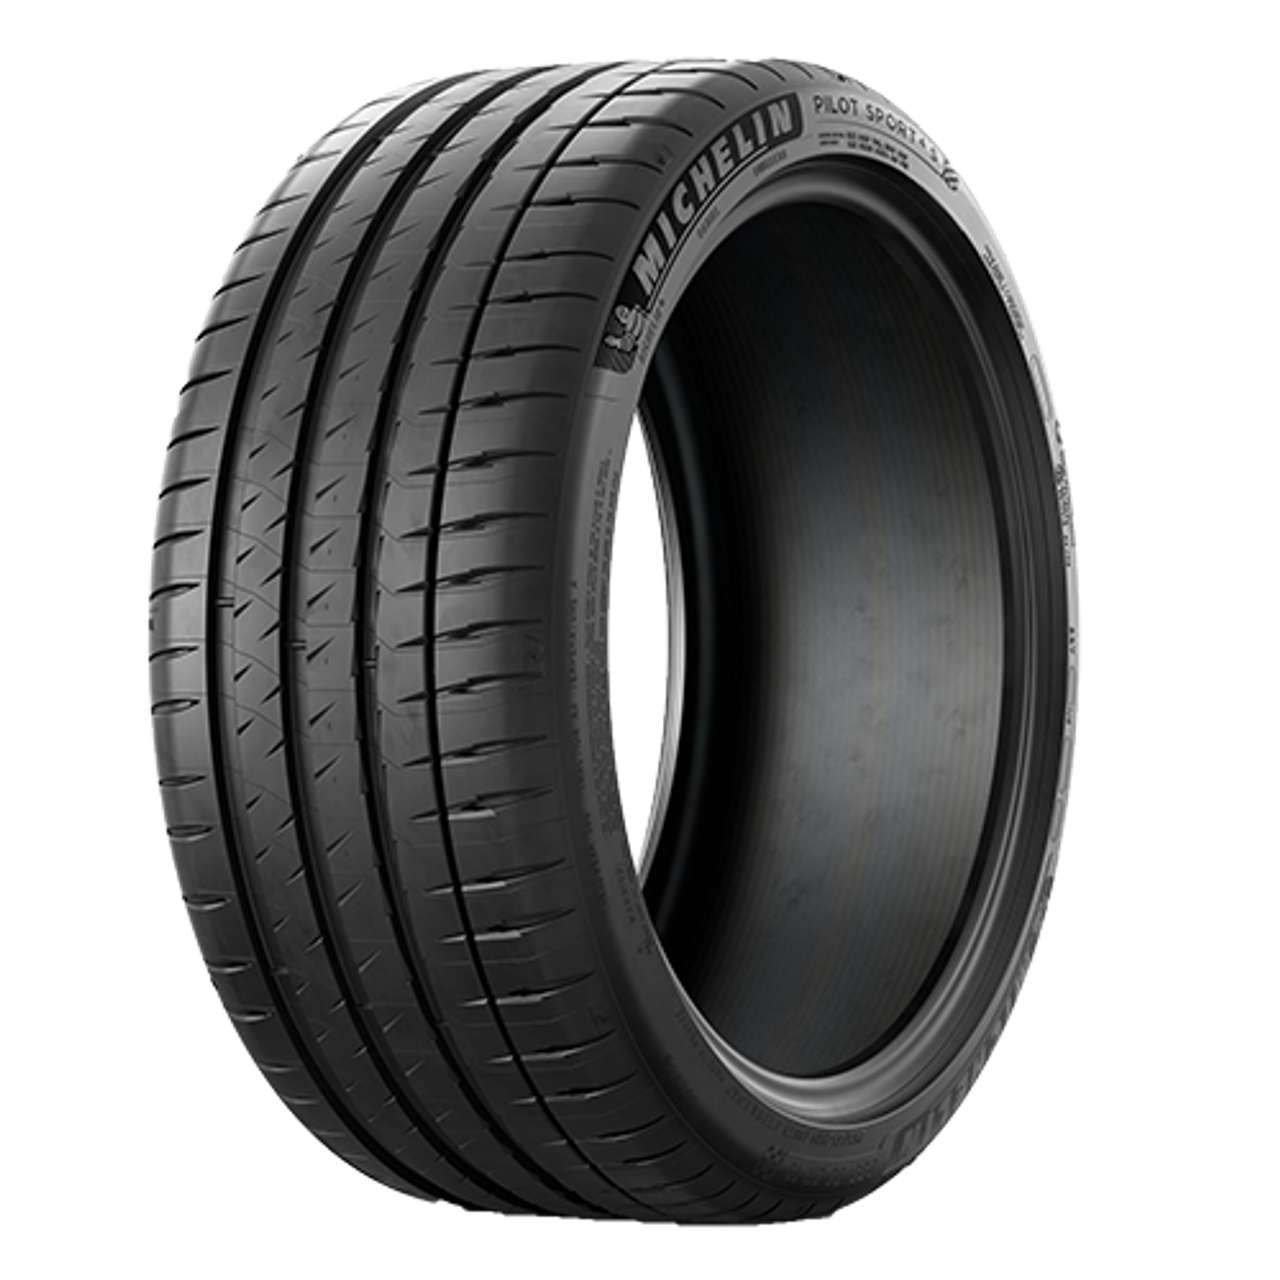 MICHELIN PILOT SPORT 4 S (MO1) (A) 275/40ZR19 105(Y) BSW